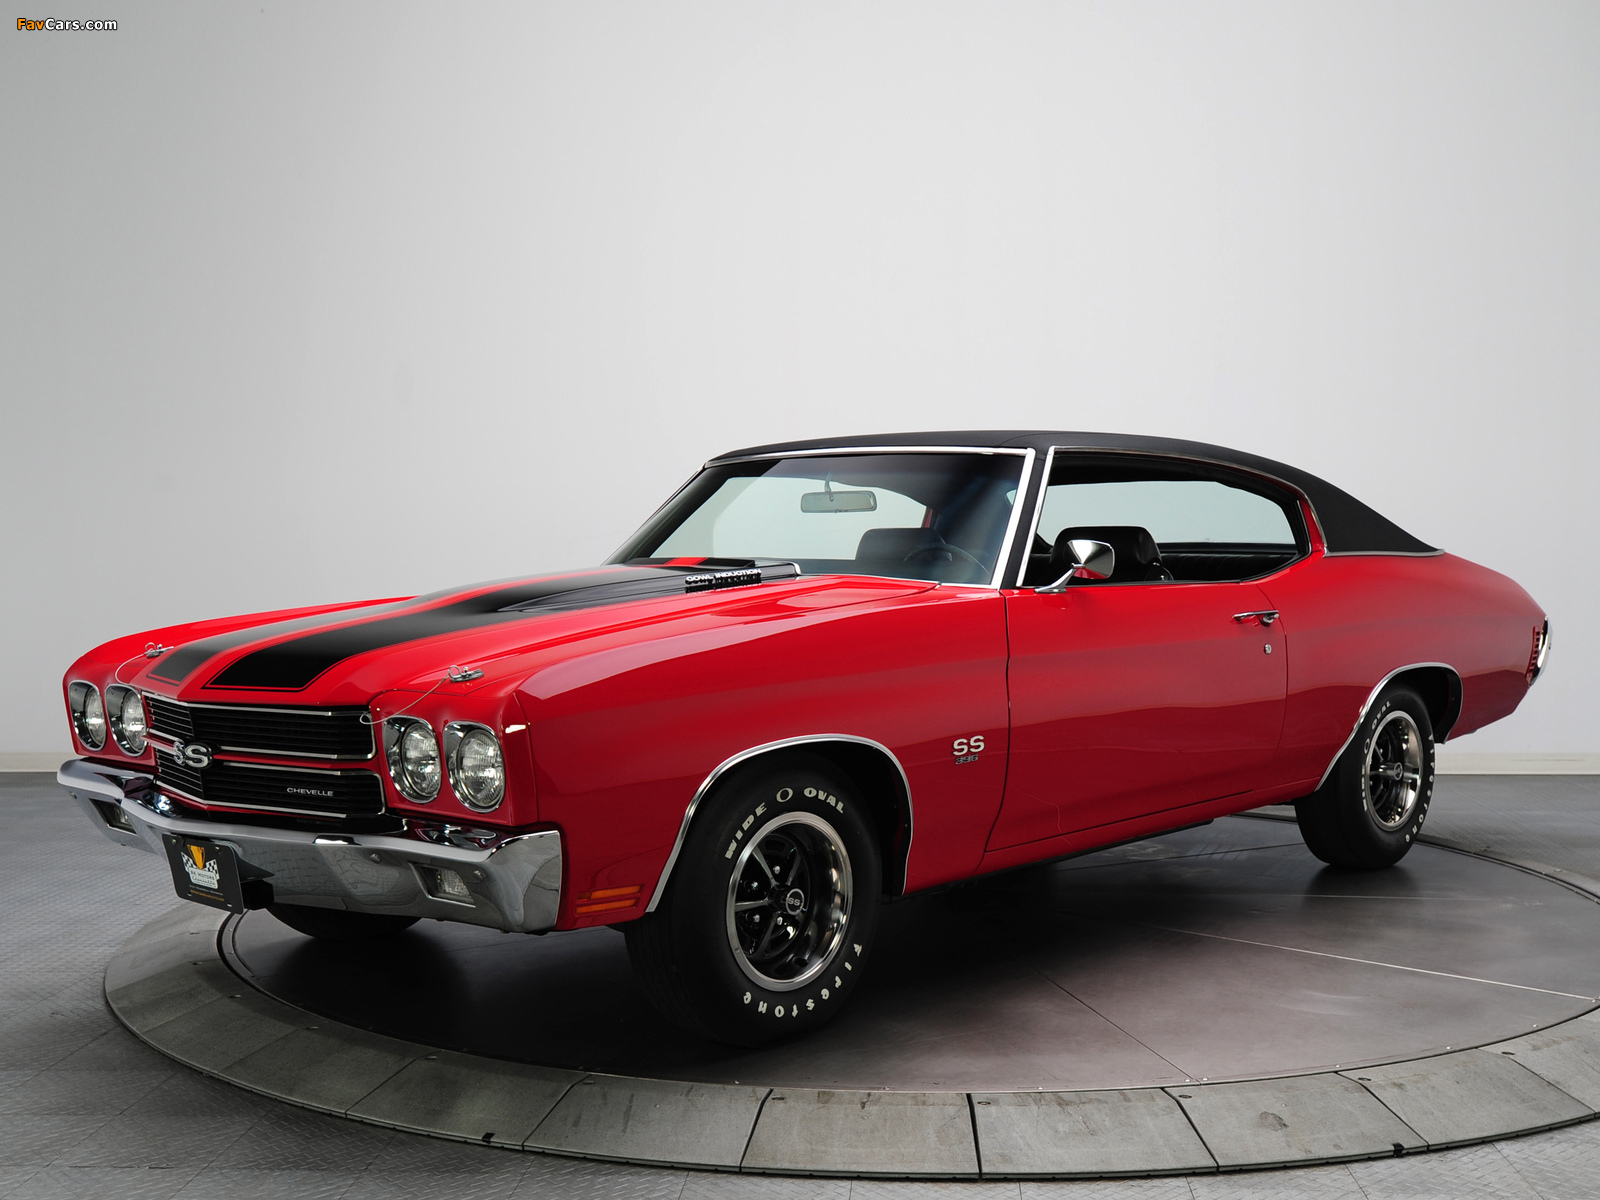 Chevrolet Chevelle SS 396 Hardtop Coupe 1970 pictures (1600 x 1200)